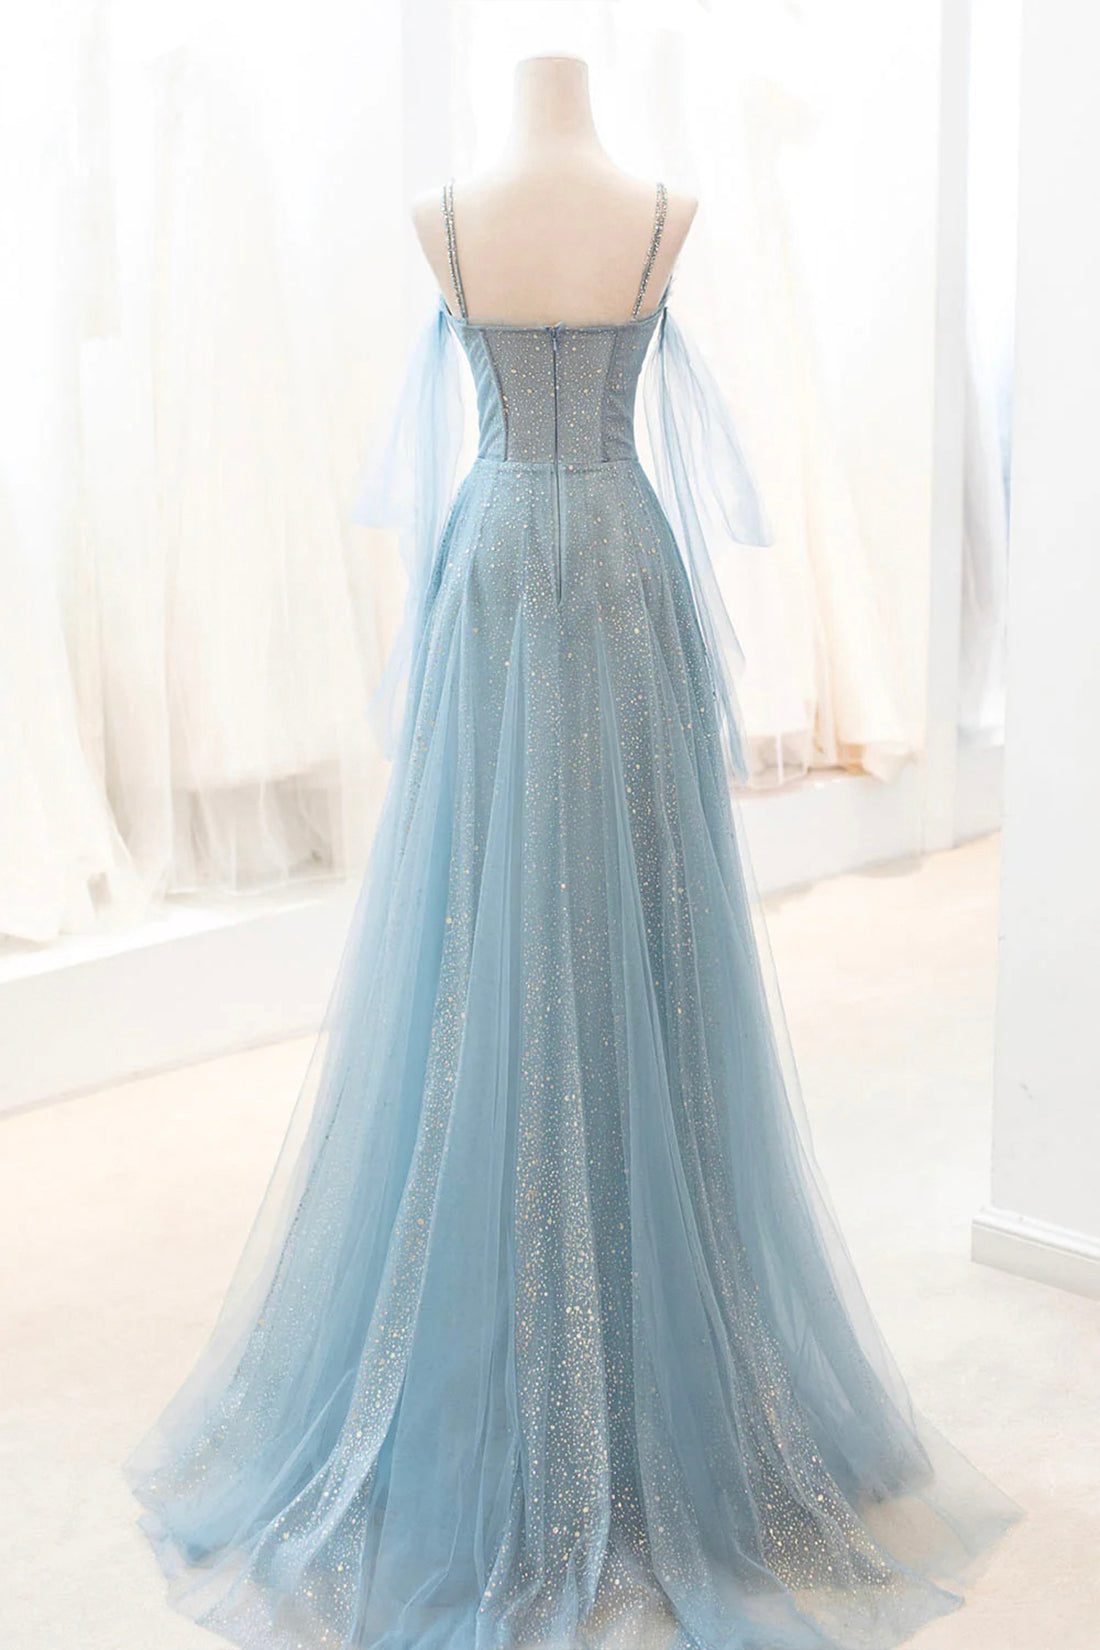 Prom Dress Outfit, Dusty Blue Sparkly Tulle Long Prom Dress, A-Line Spaghetti Strap Evening Dress